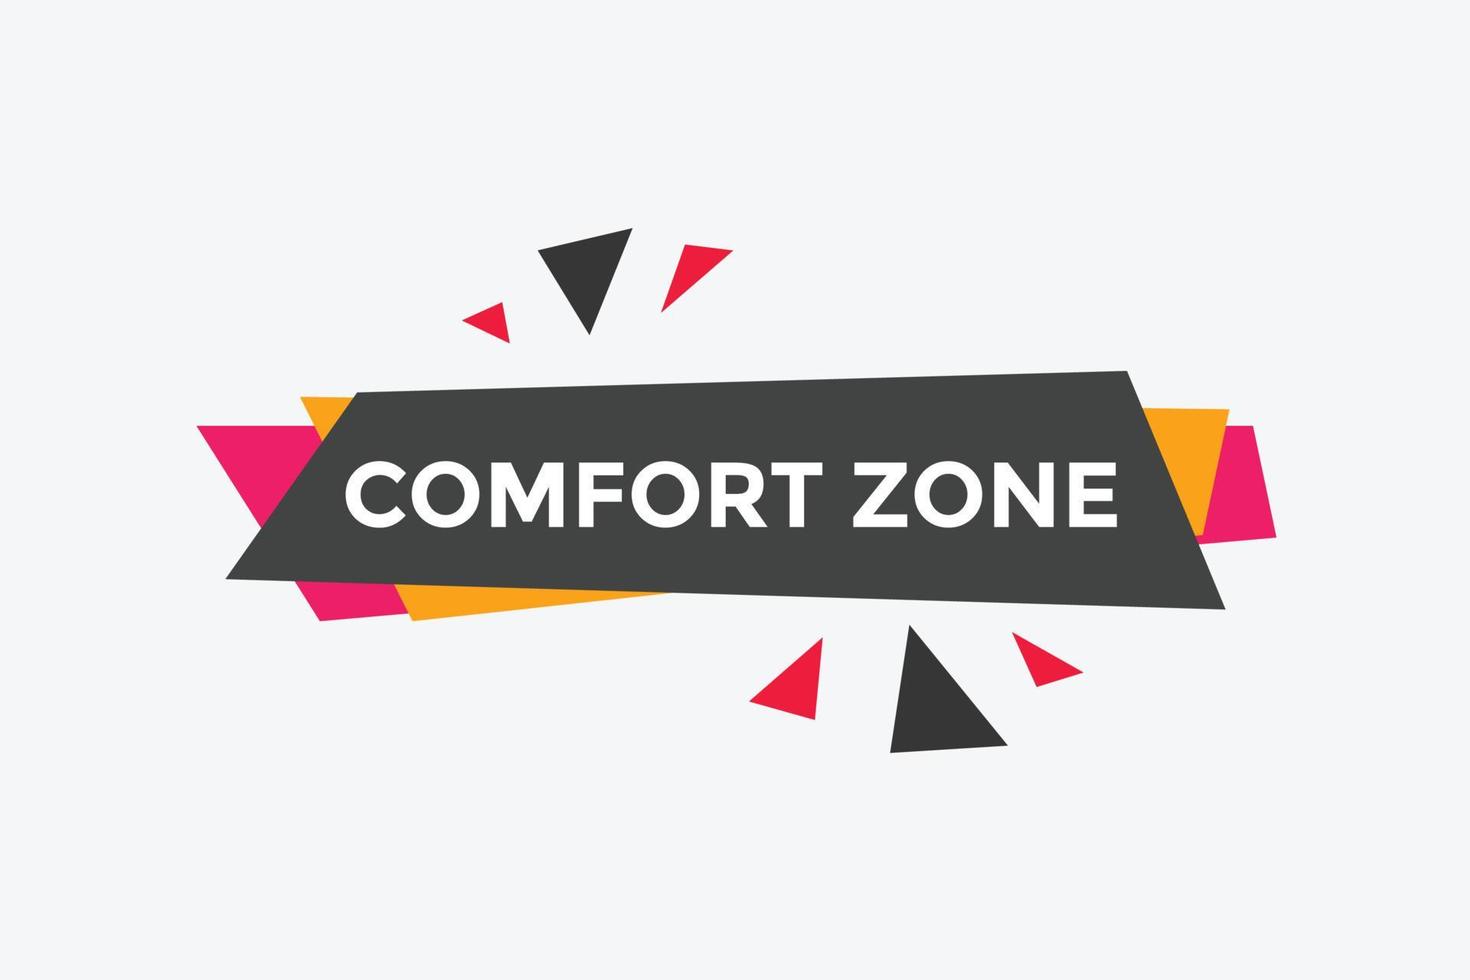 Comfort zone text button. speech bubble. Comfort zone Colorful web banner template. vector illustration